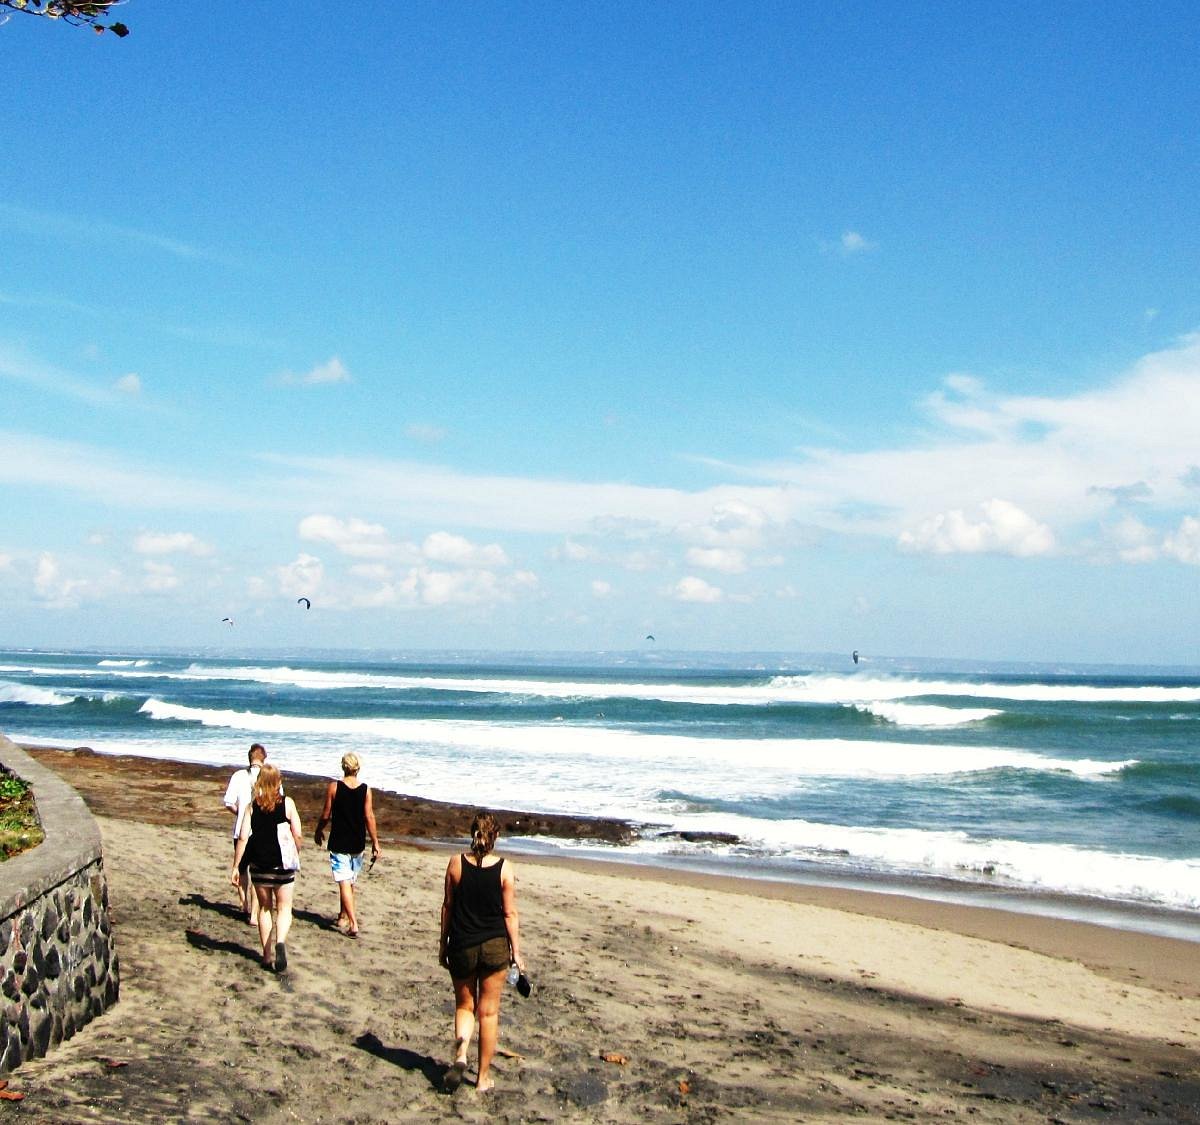 If you're in Bali, come see us in Canggu